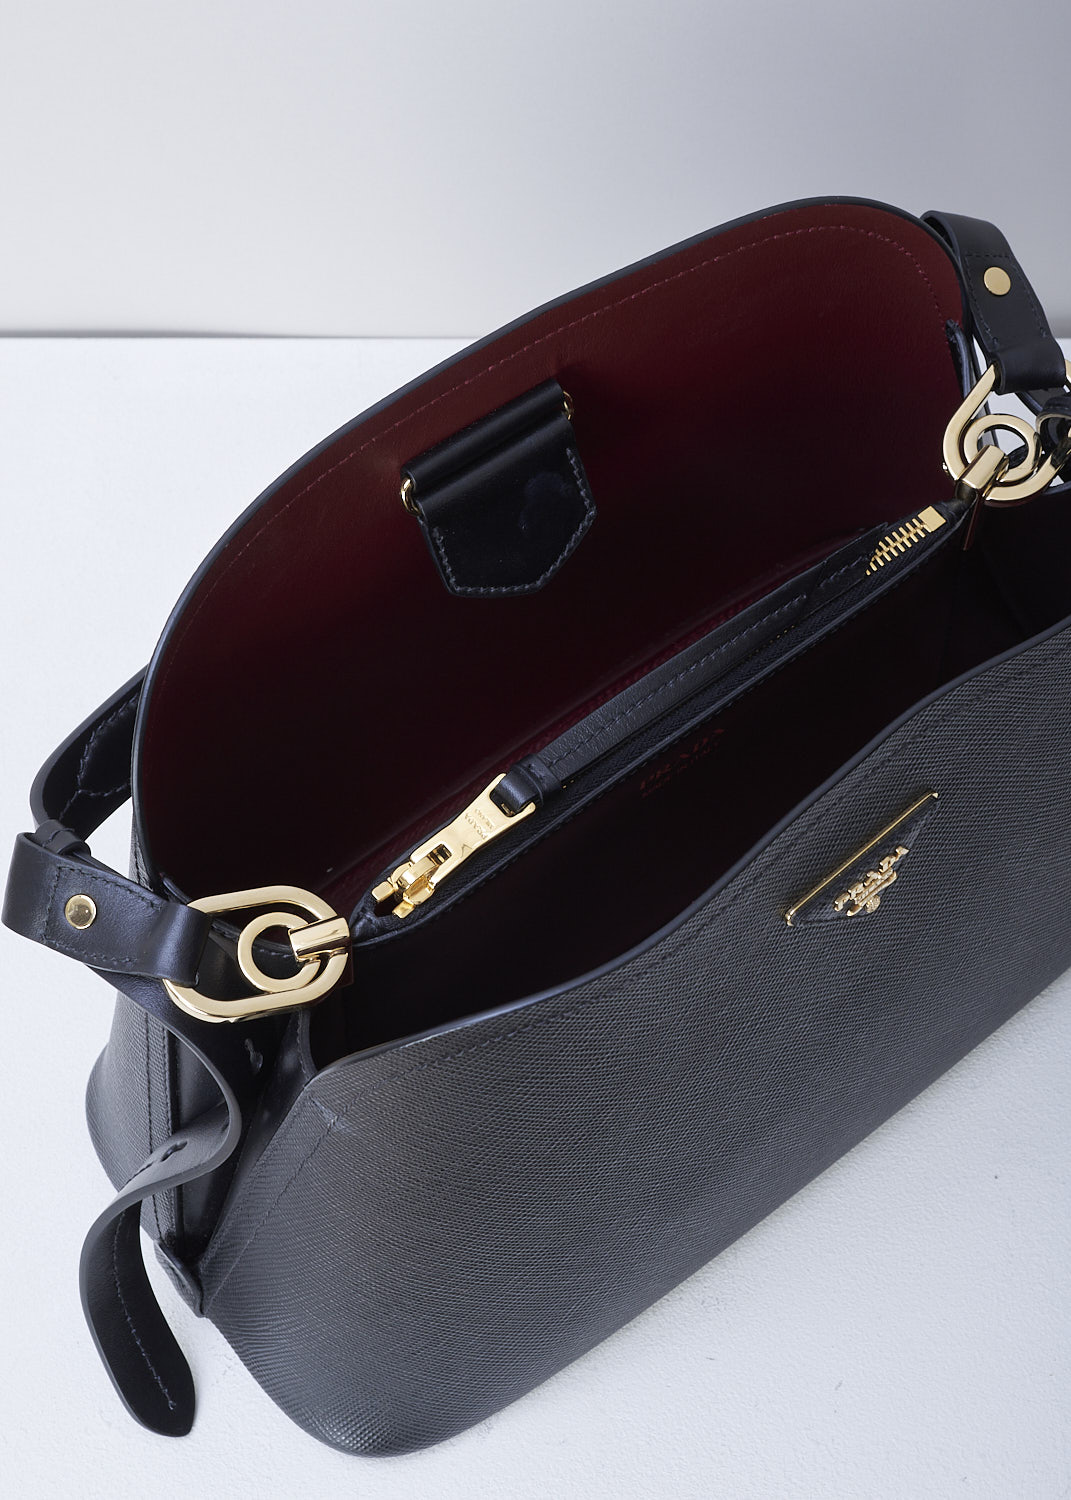 PRADA, SMALL MATINÃ‰E SHOULDER BAG IN BLACK, SAFFIANO_CUIR_C_1BA251_NERO_CERISE, Black, Detail 1, This small black MatinÃ©e shoulder bag is made with Saffiano leather. Both the leather handle and shoulder strap are adjustable and detachable. The bag has gold-tone metal hardware with the brand's triangle logo plaque on the front. The open top has a magnetic snap closure in the middle. The cherry red interior has a centre zip pocket that divides the main compartment into two spacious sides. The bag has a removable leather keychain.  


